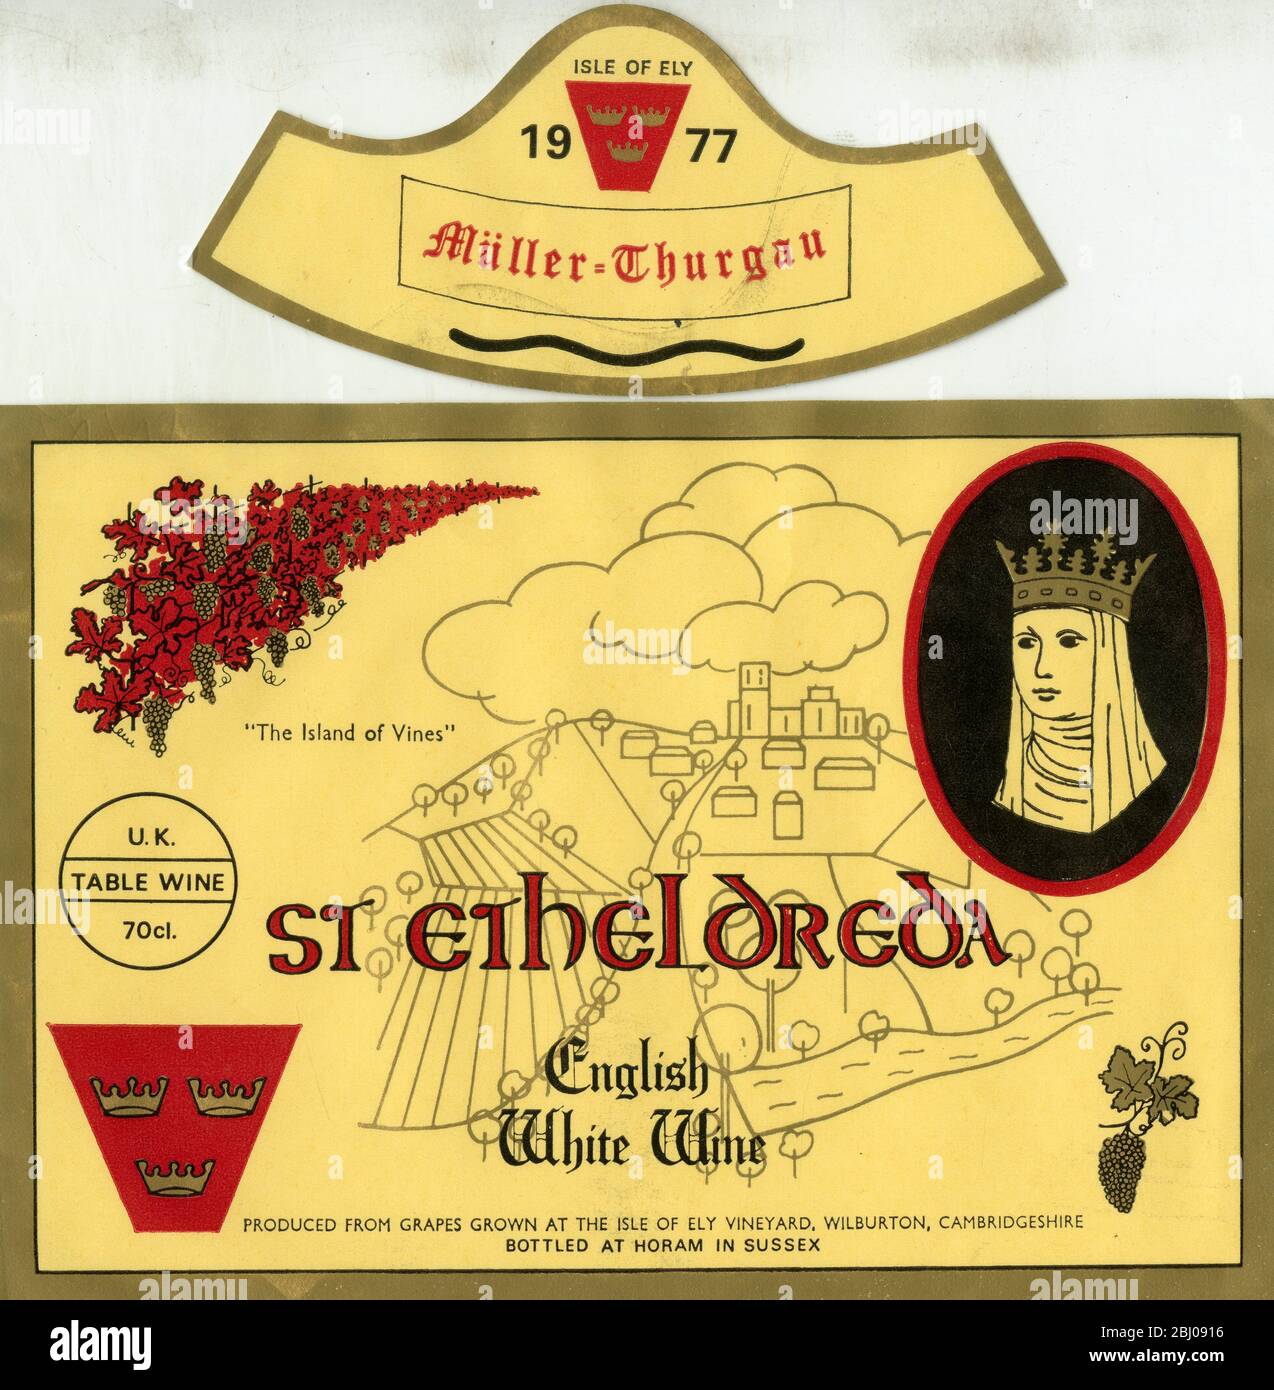 Wine Label - St Etheldreda Muller Thurgau English White Wine. Produced from grapes grown at the Isle of Ely Vineyard, Wilburton, Cambridgeshire. - 1977 Stock Photo